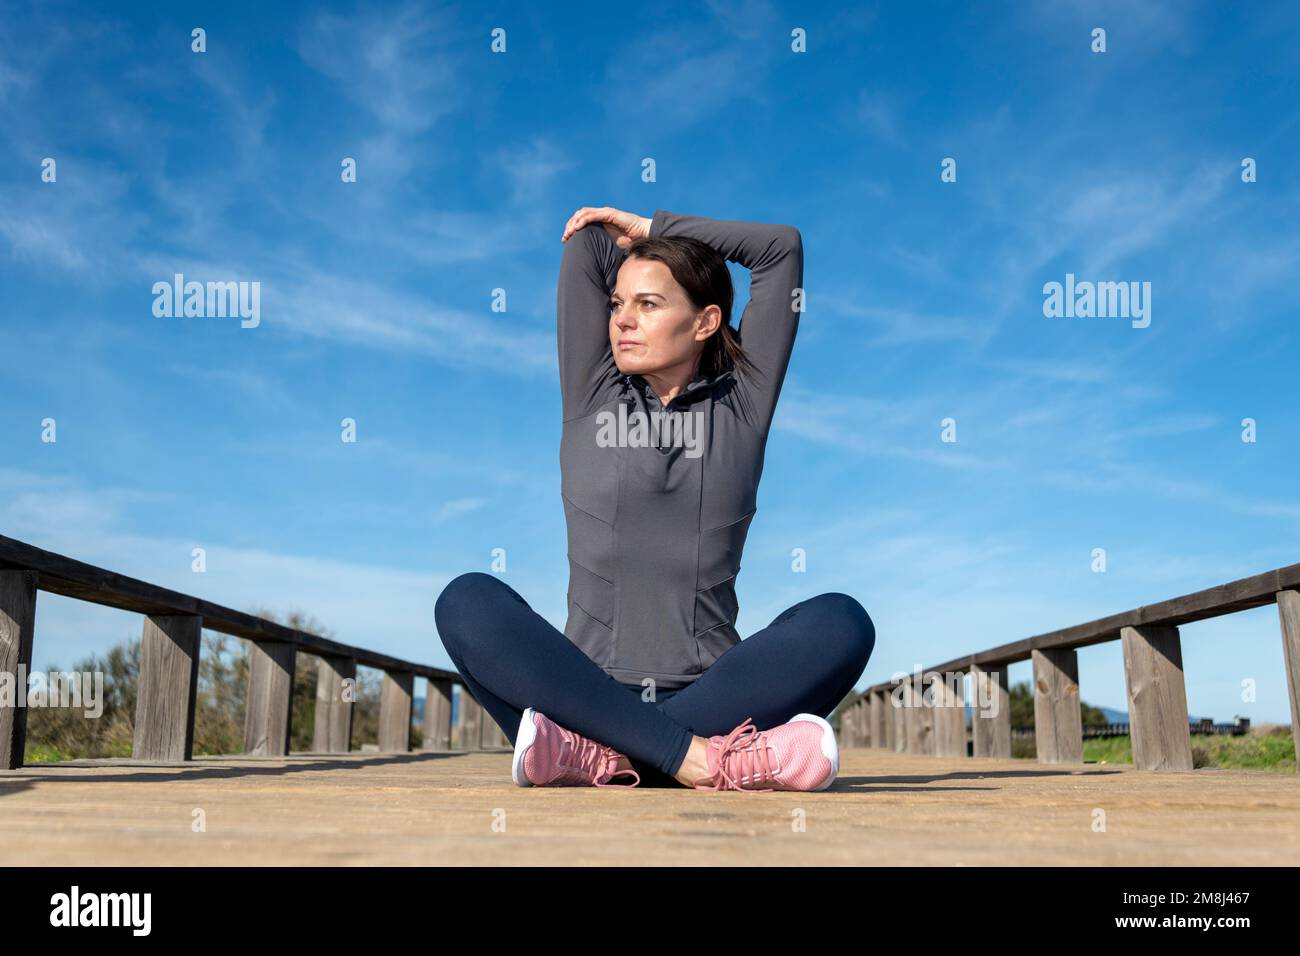 Sporty woman sitting cross legged doing an arm stretch warm up exercise. Stock Photo